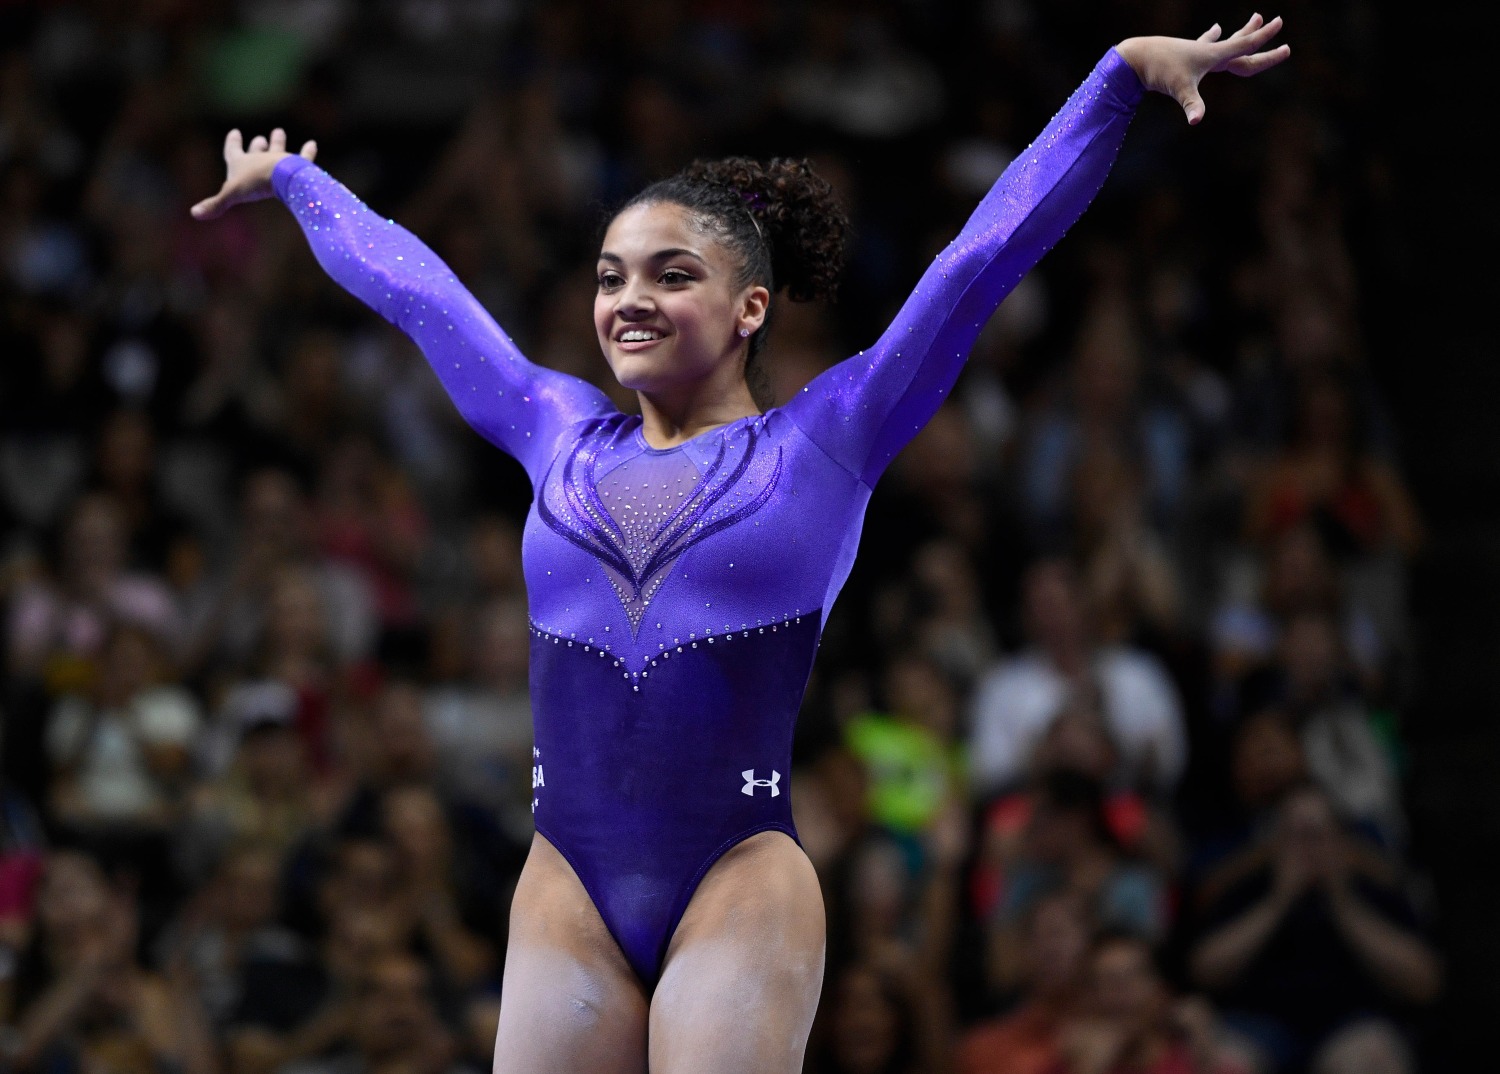 Laurie Hernandez Beam Olympics 2016 The Best Picture Of Beam 